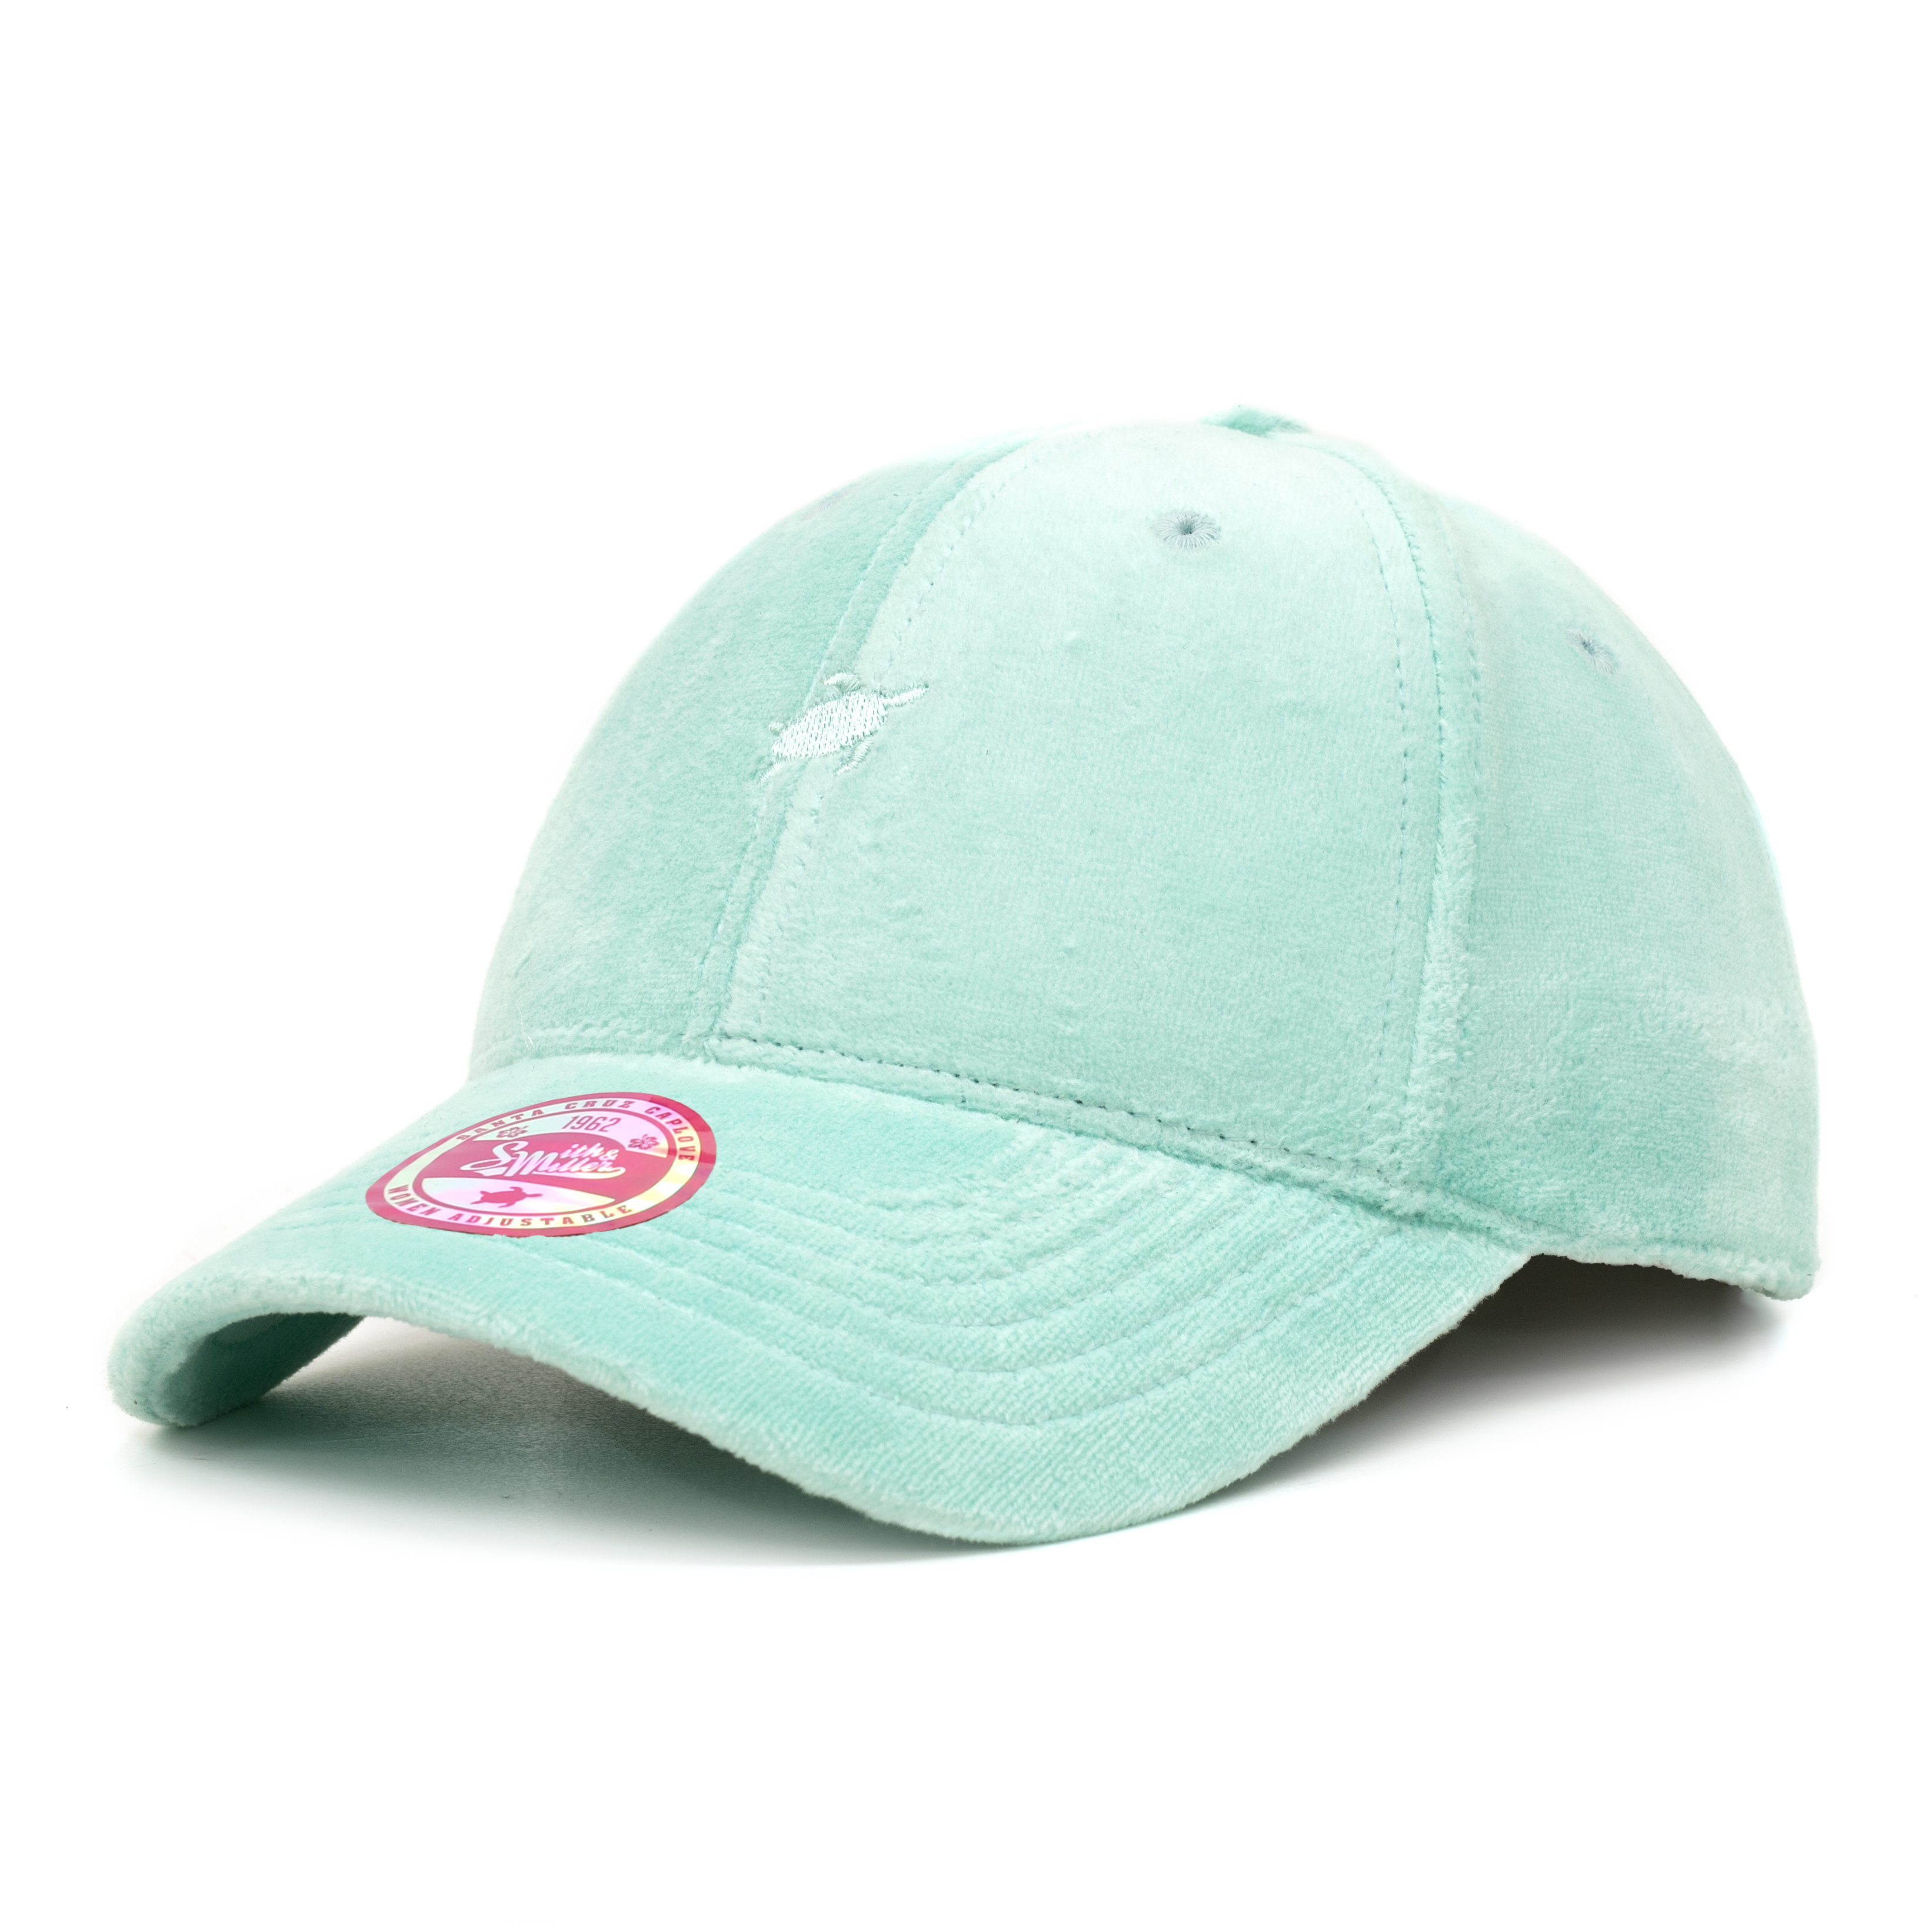 Smith & Miller Perris Women Curved Cap, turquoise